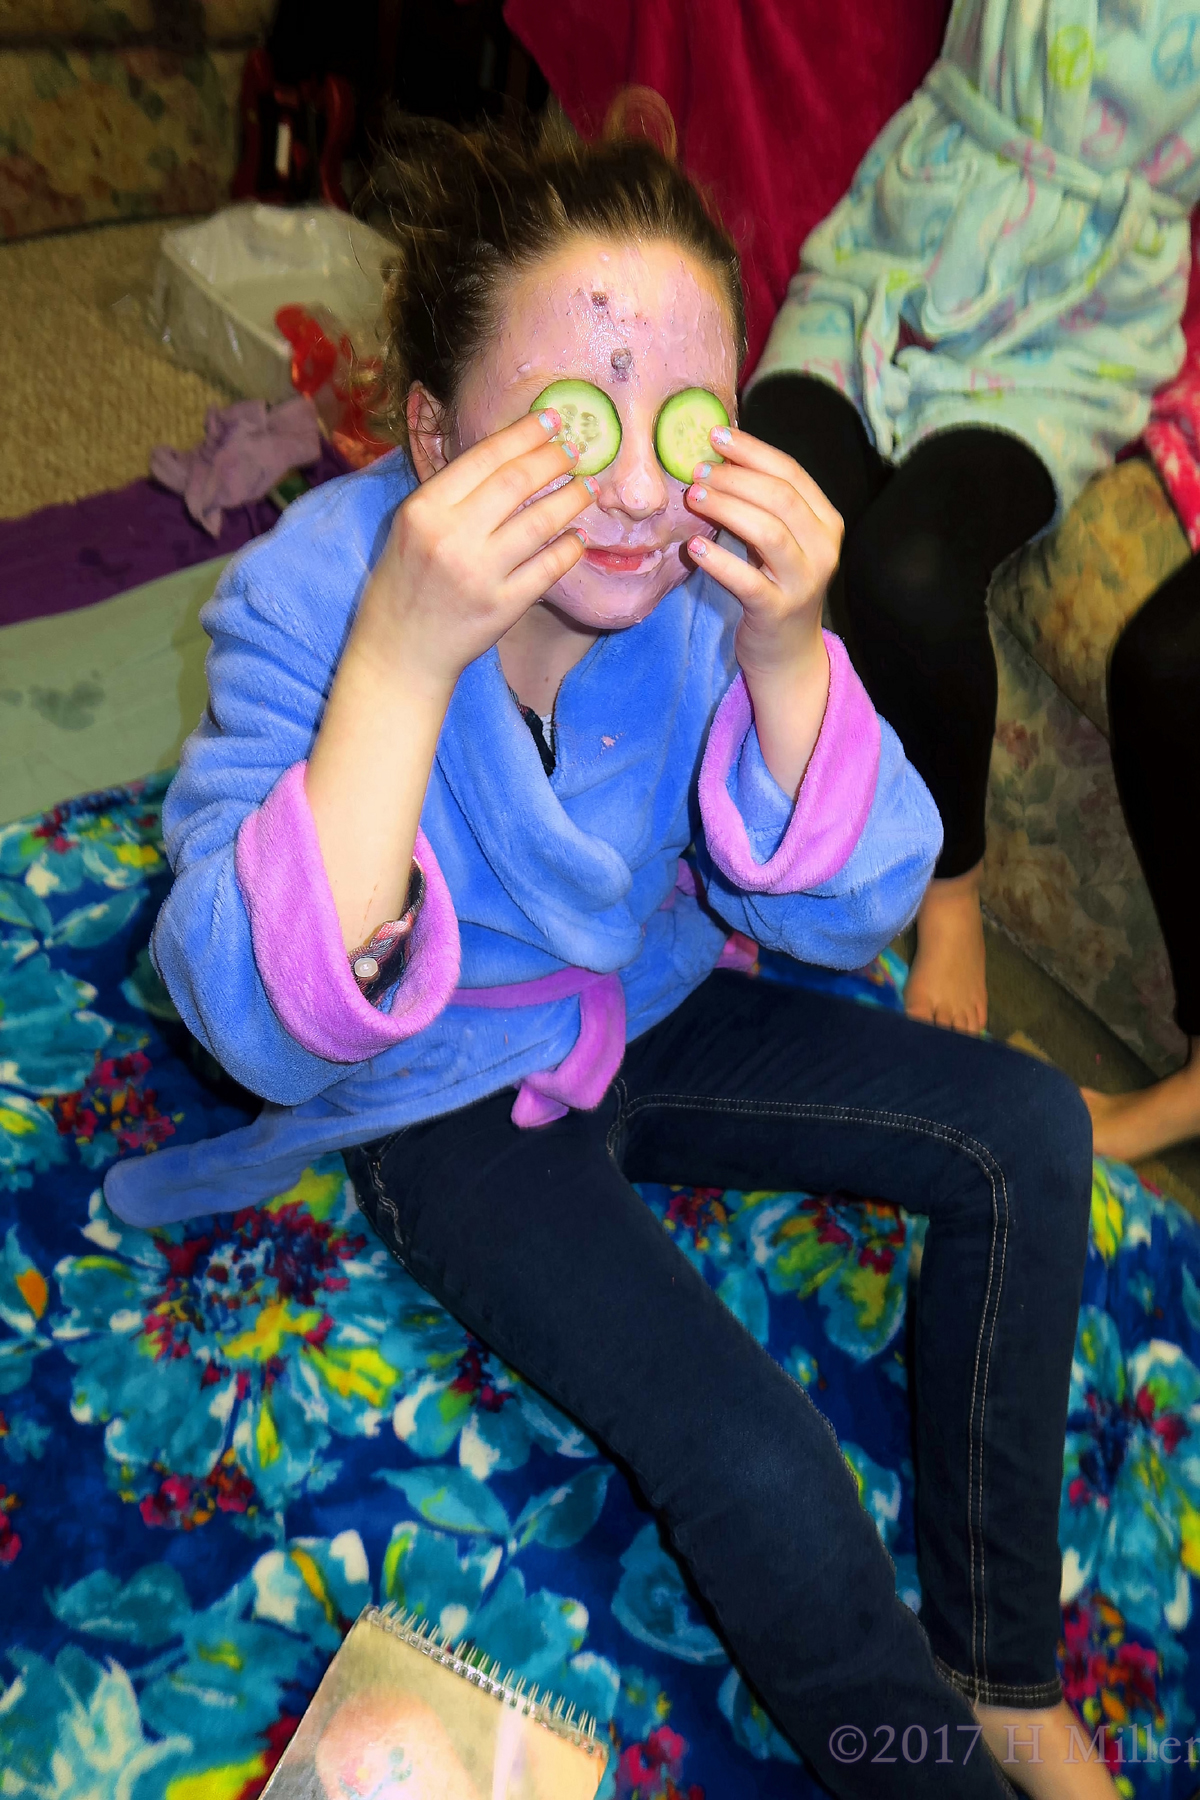 Putting Her Cukes Back On Her Eyes During Her Facial. 1